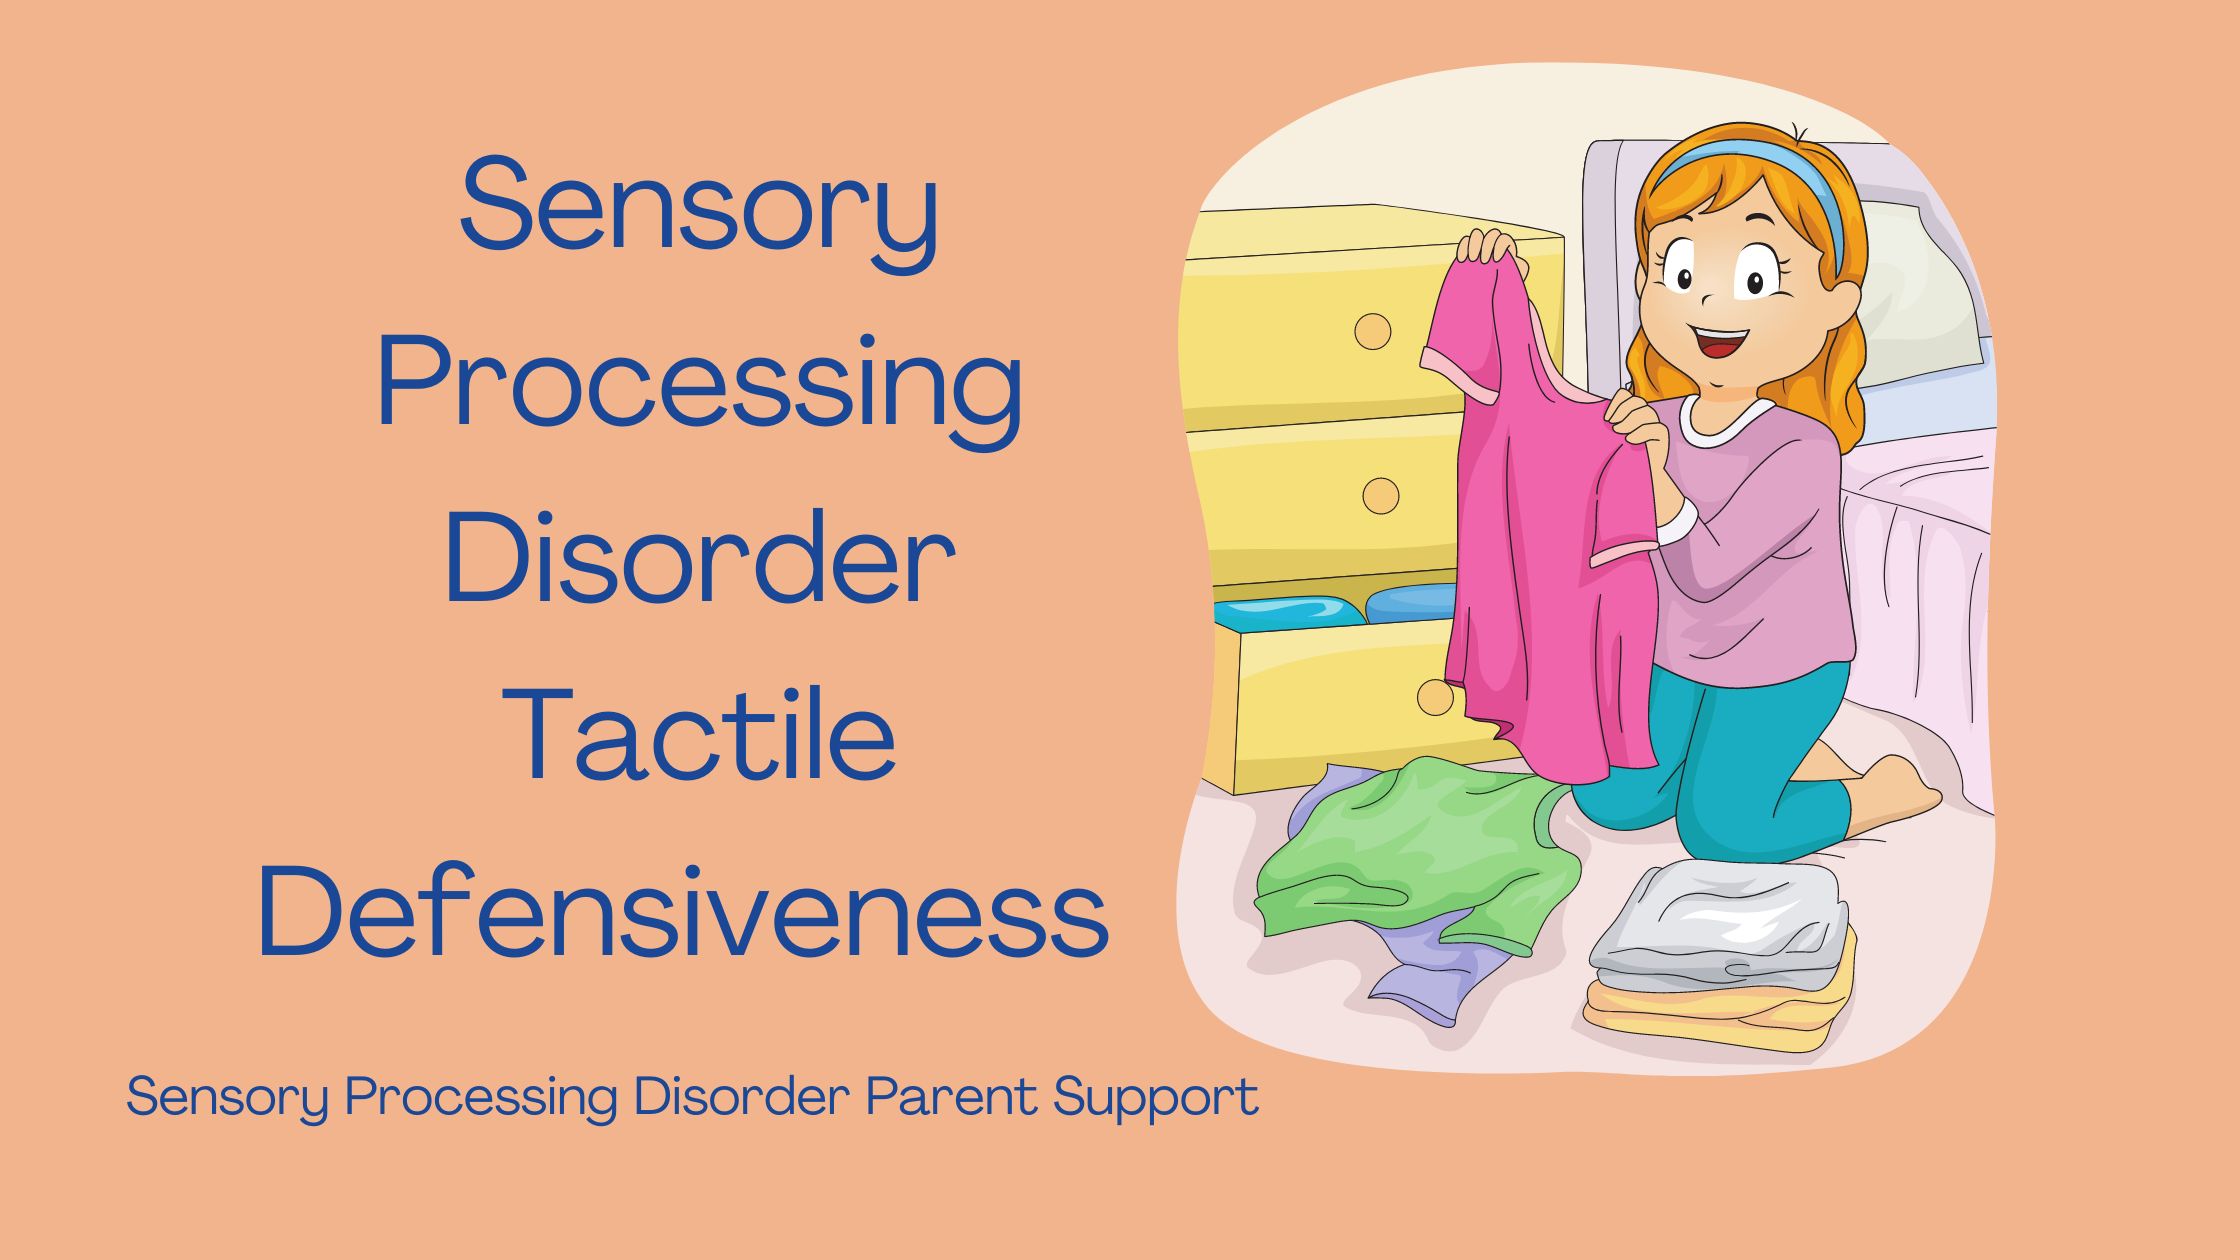 child with sensory processing disorder in her room putting away her laundry and folding her clothes Sensory Processing Disorder Tactile Defensiveness